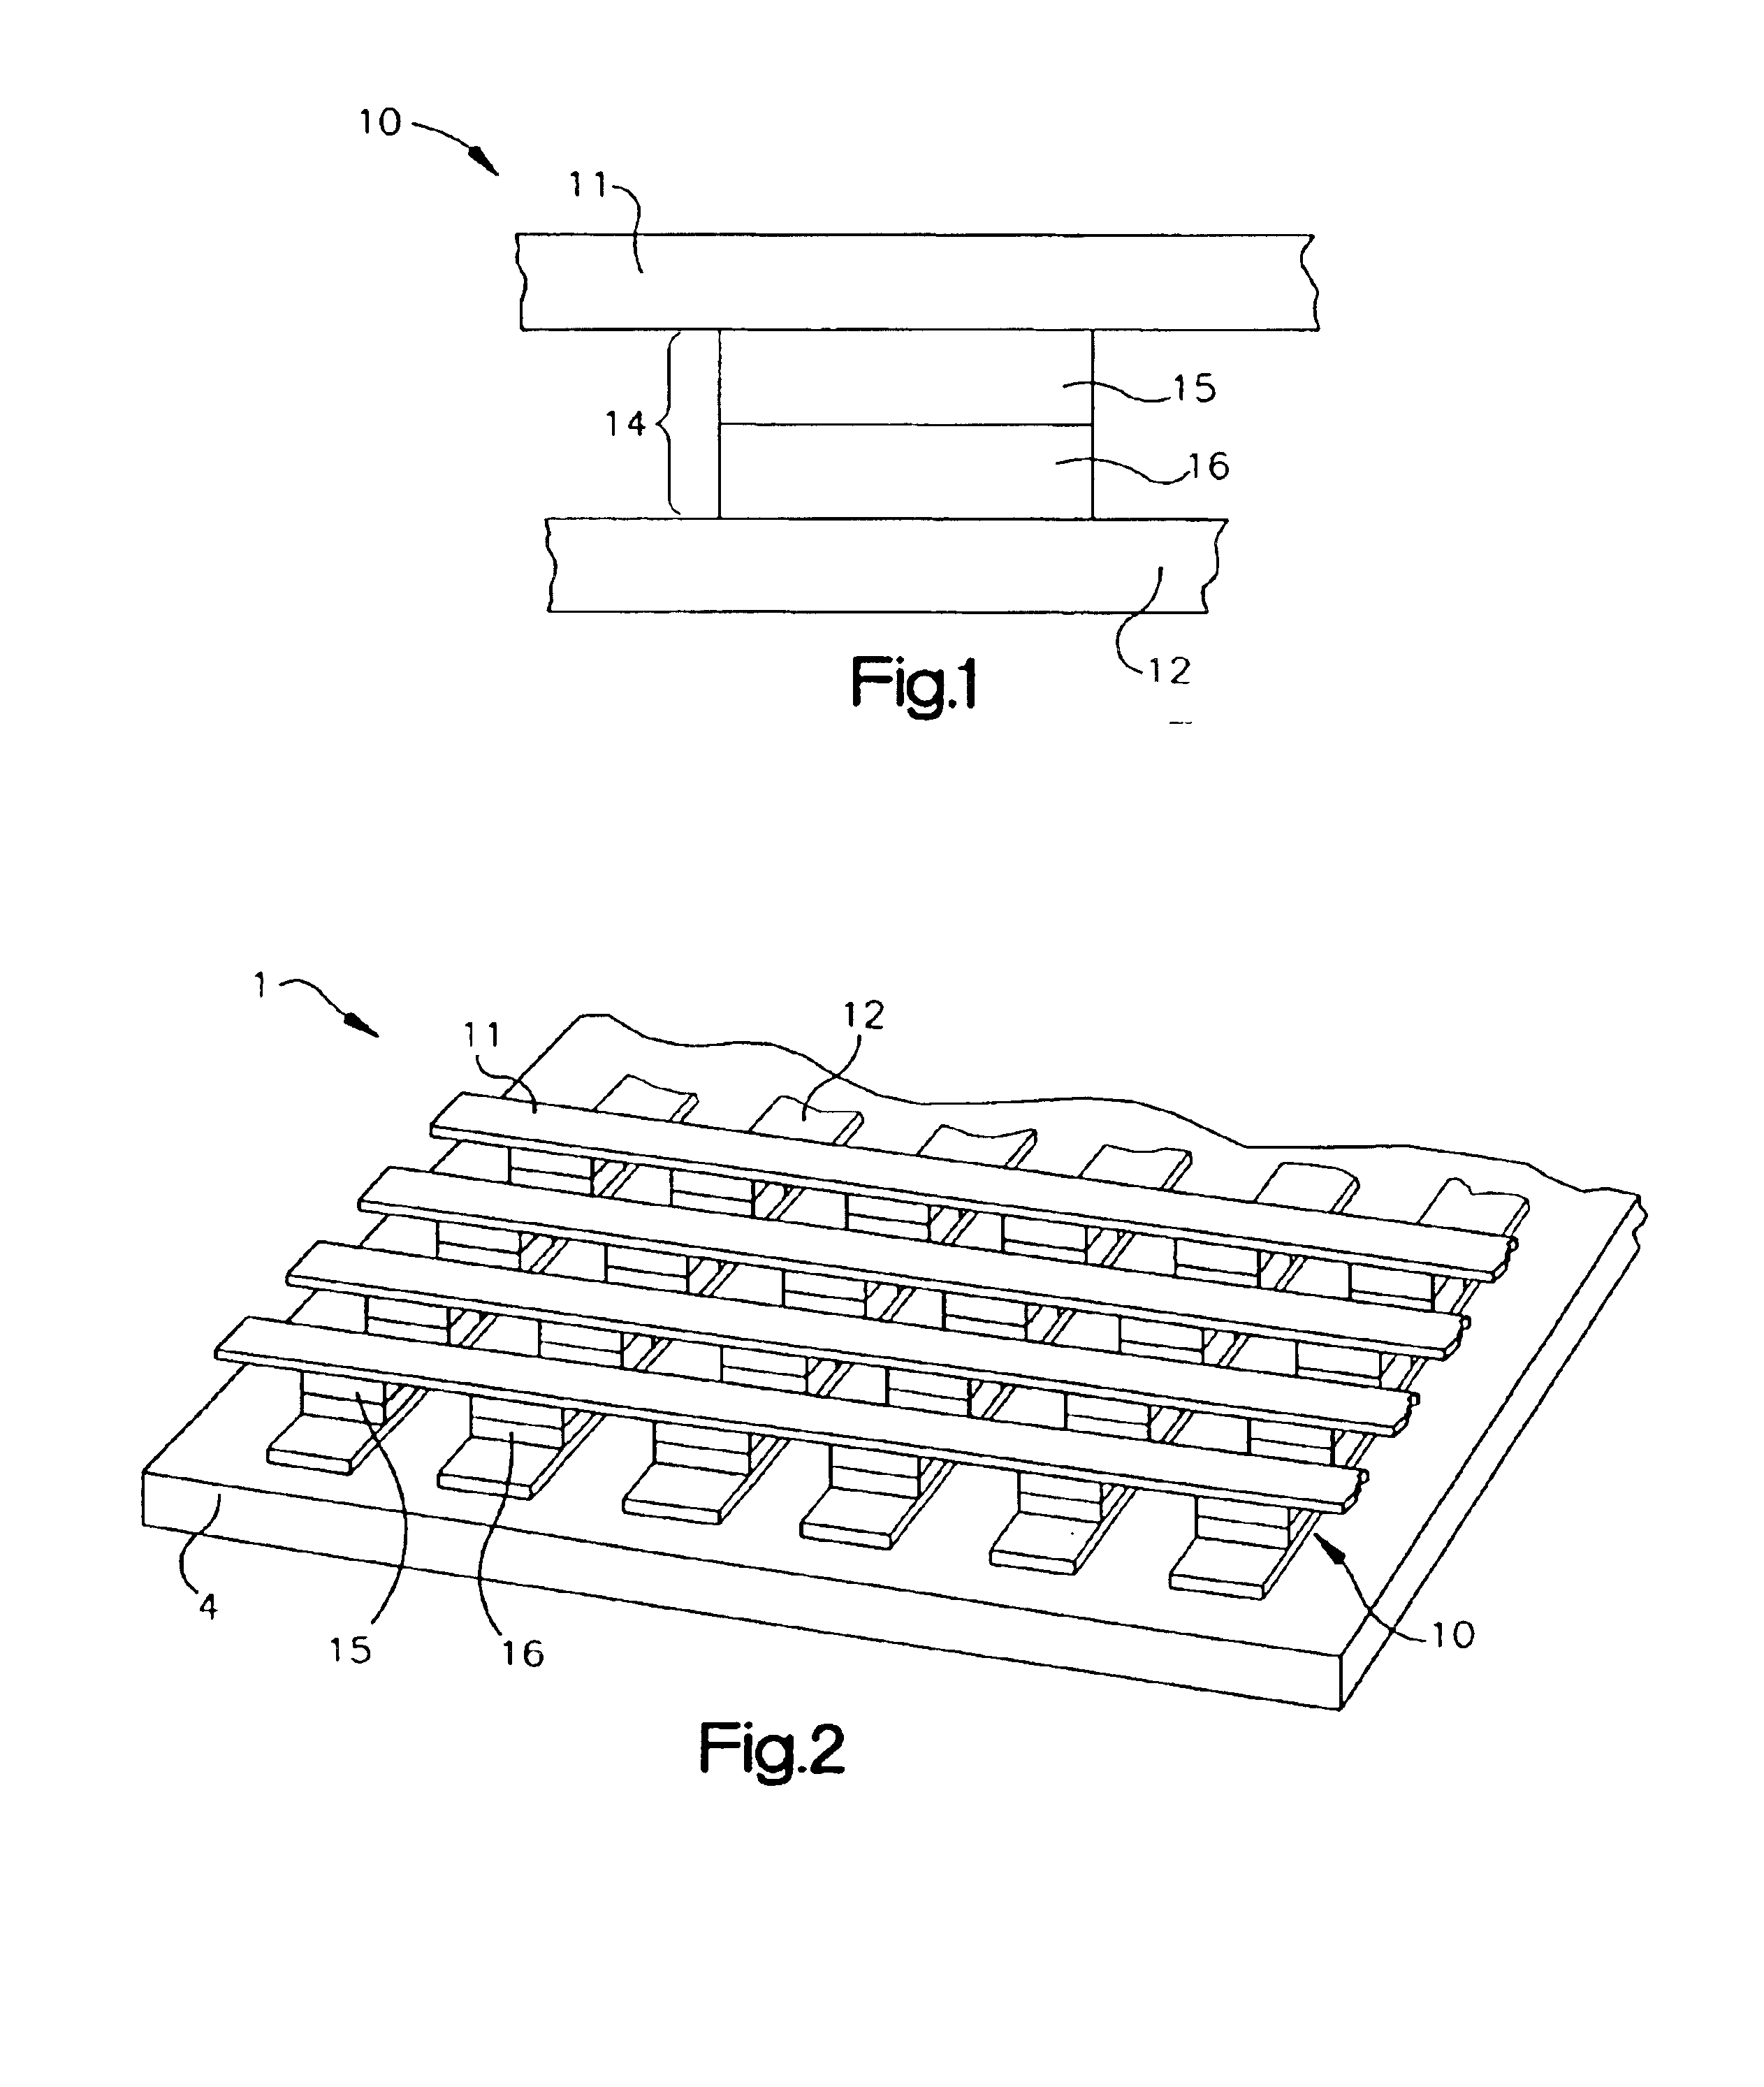 Memory device with active passive layers